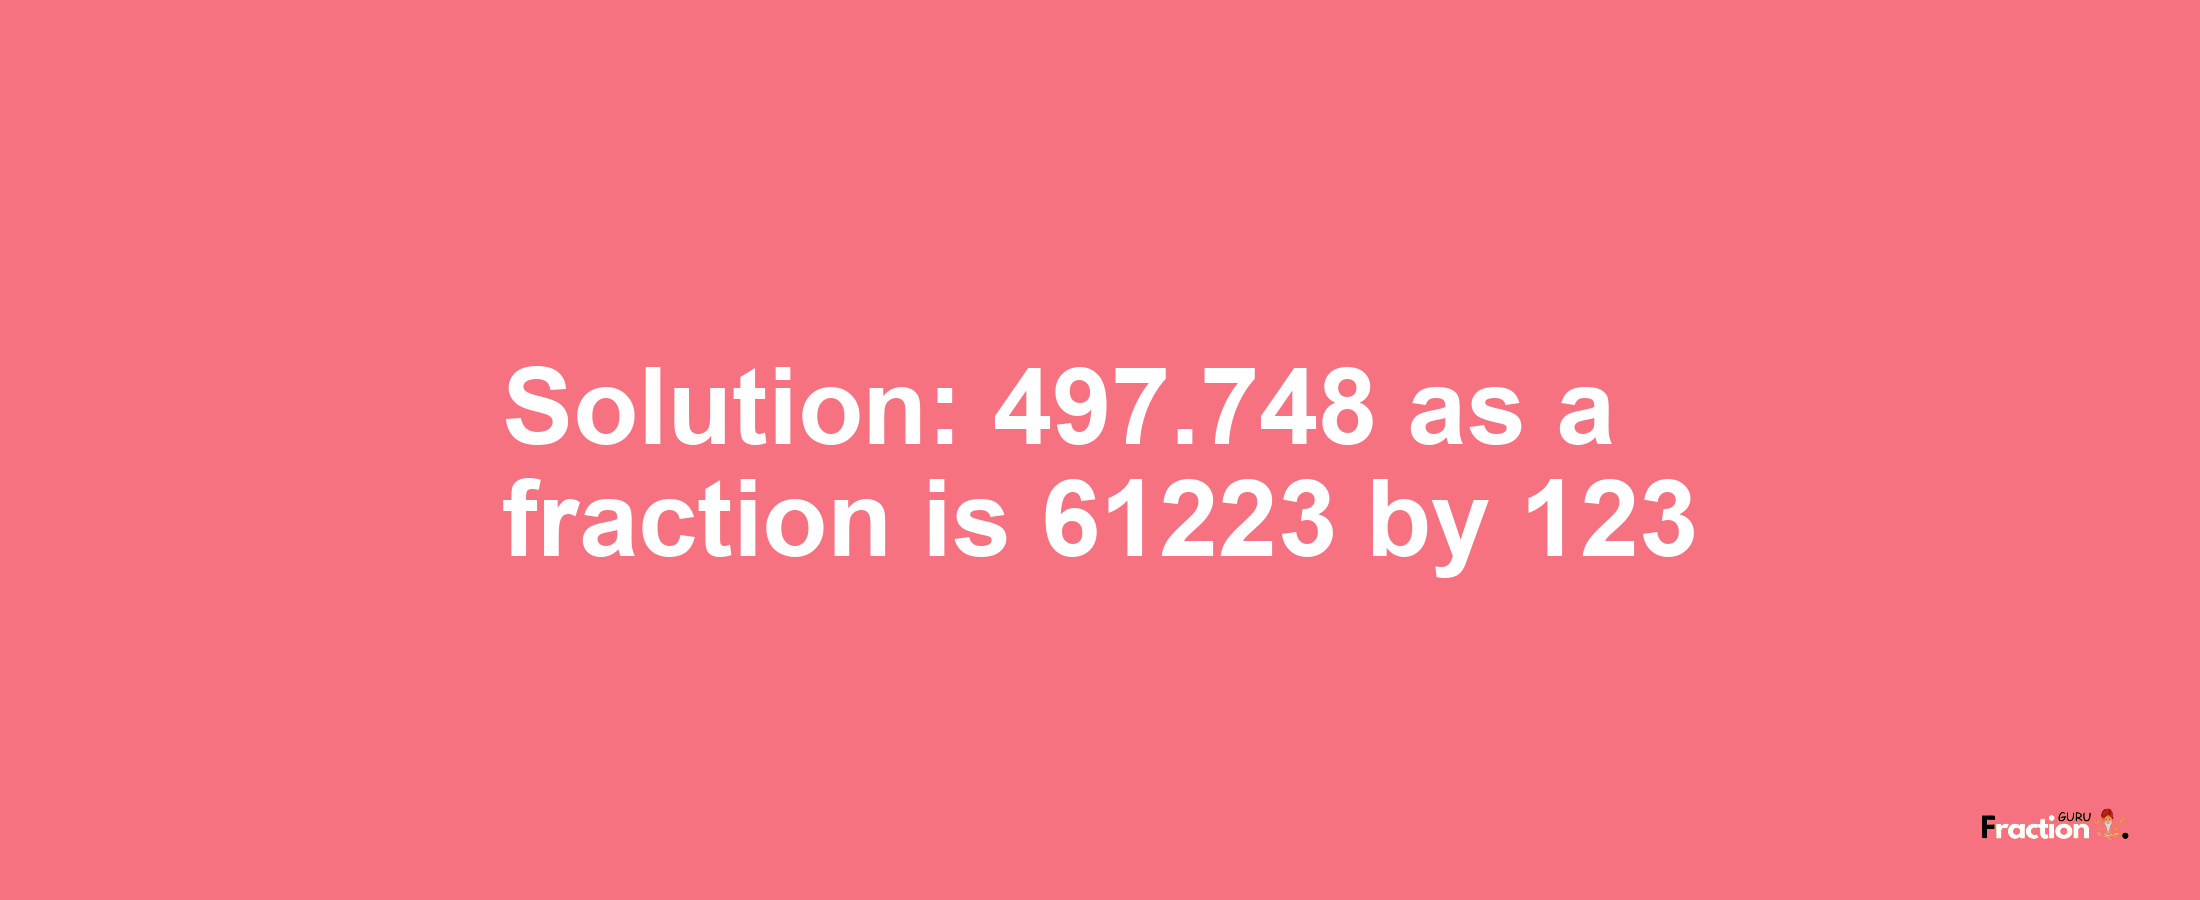 Solution:497.748 as a fraction is 61223/123